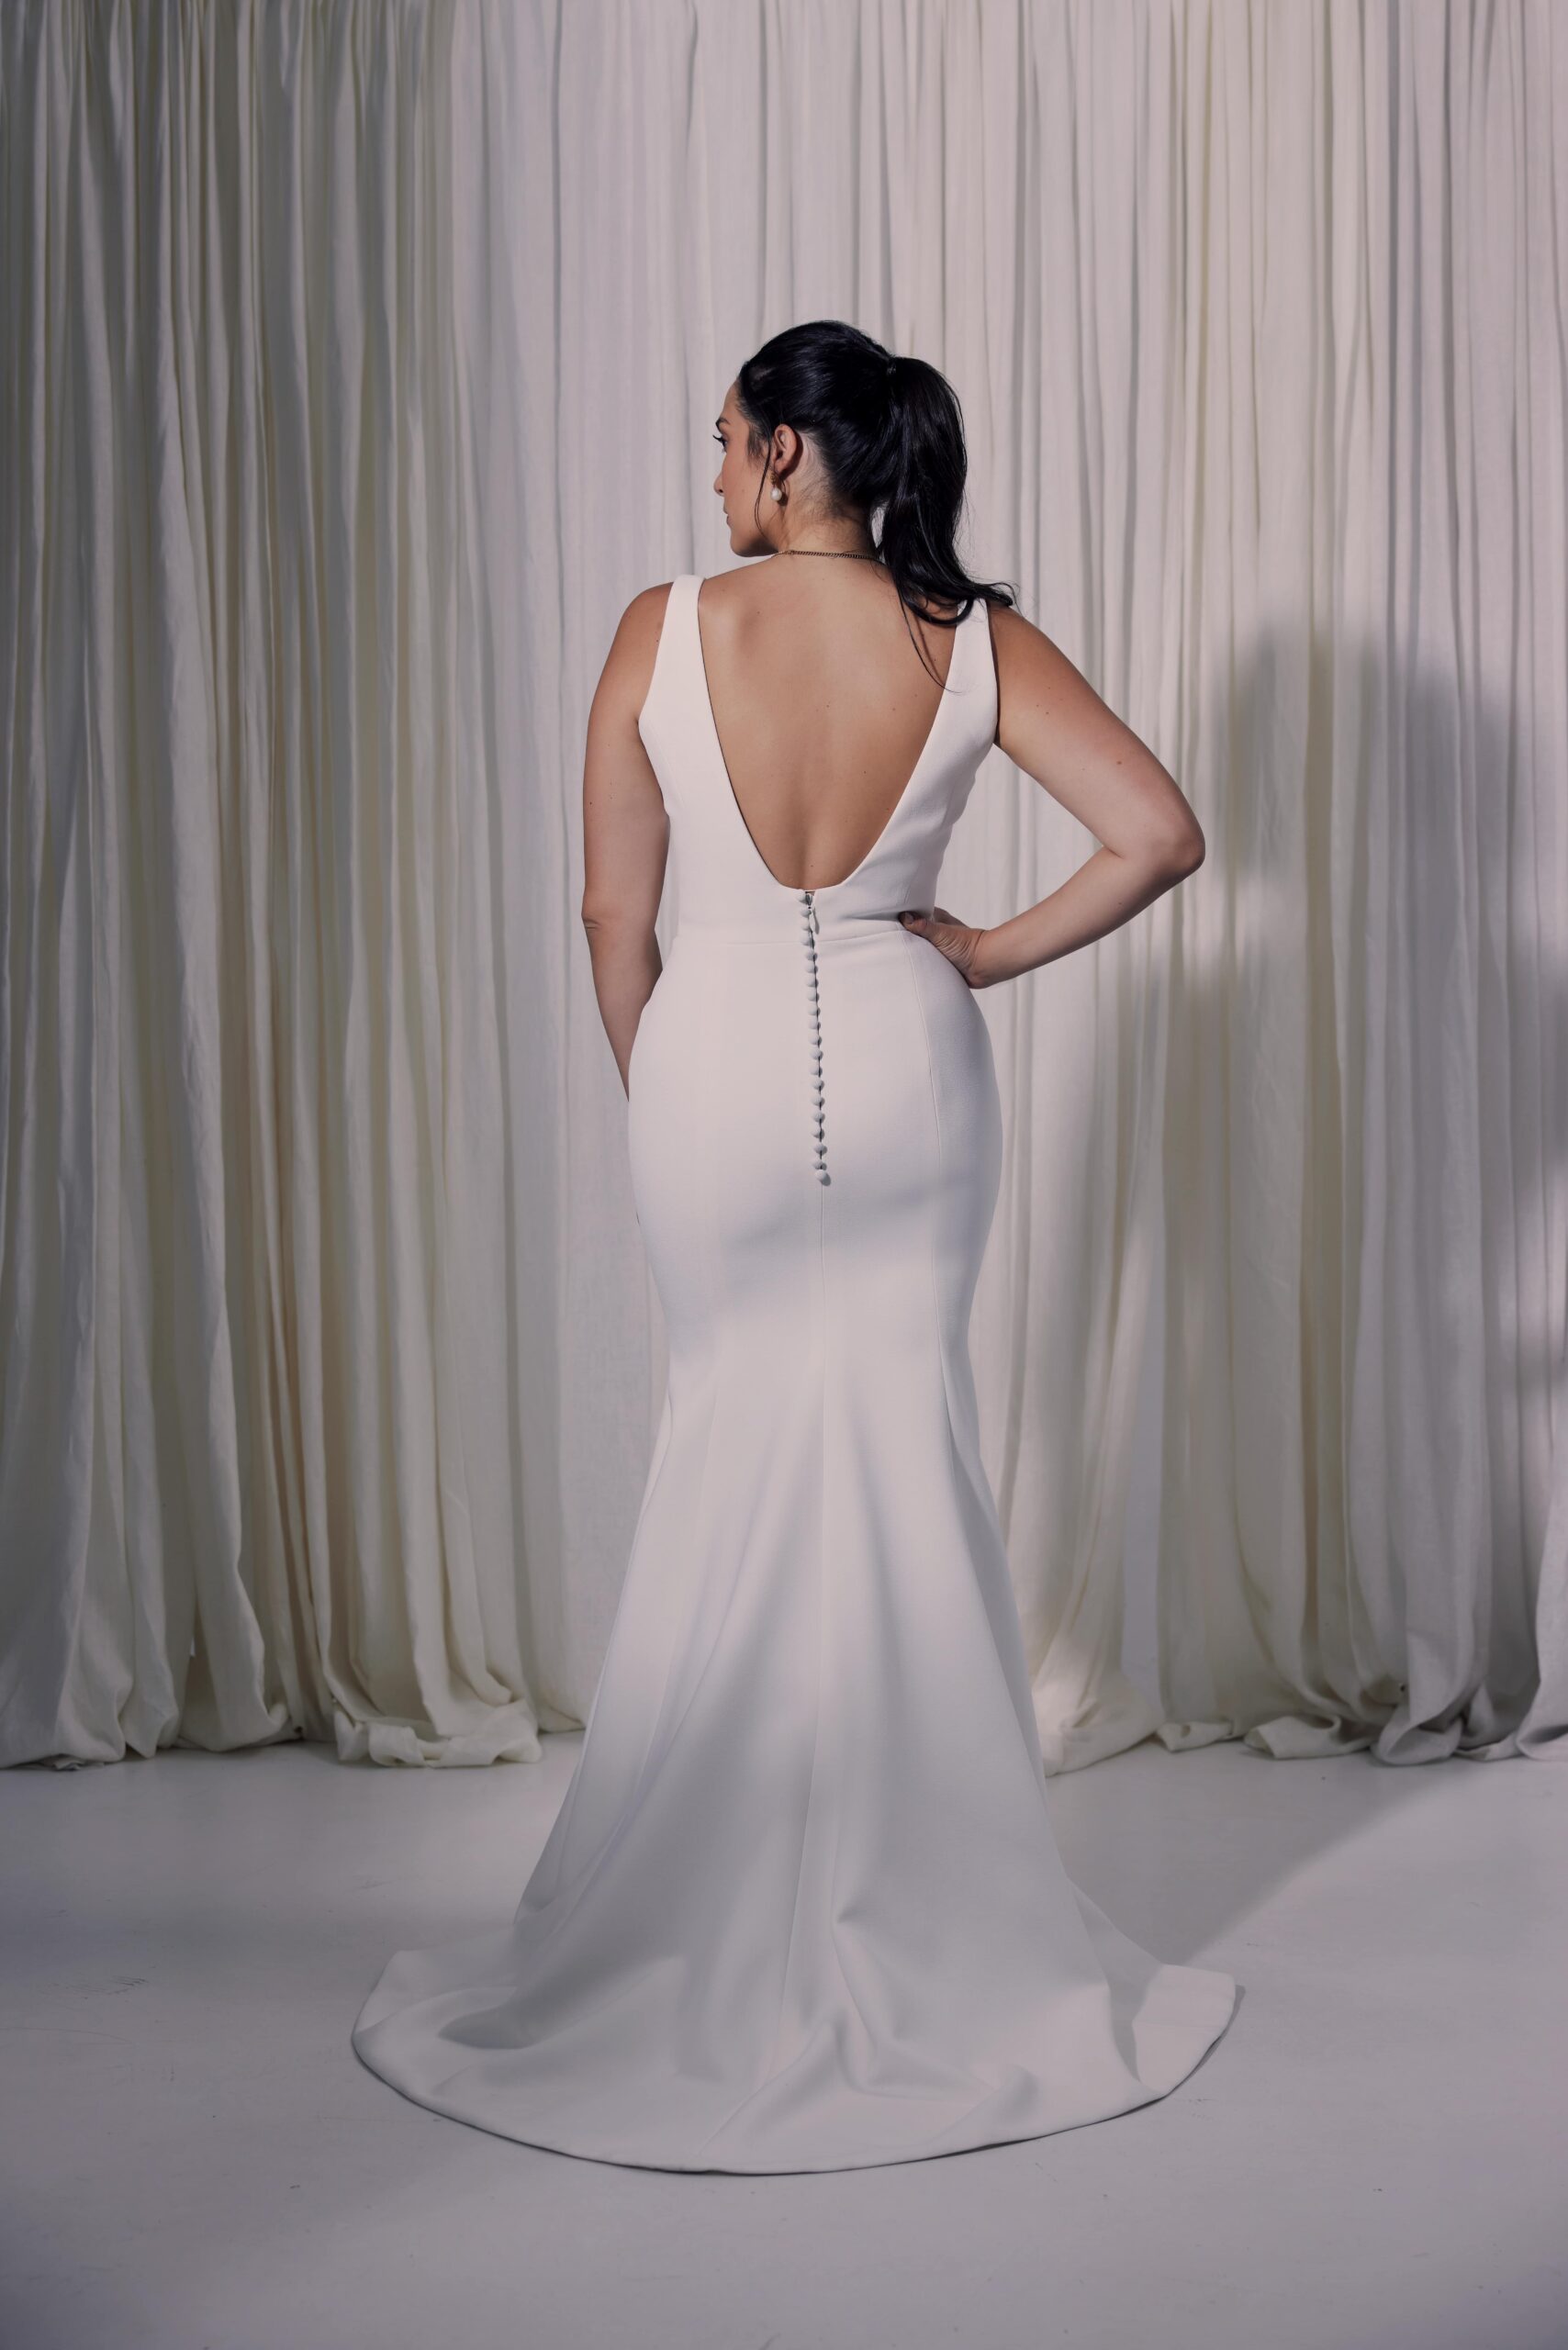 The Trevi gown - a sculpted fit and flare silhouette in double crepe with a modern square neckline.